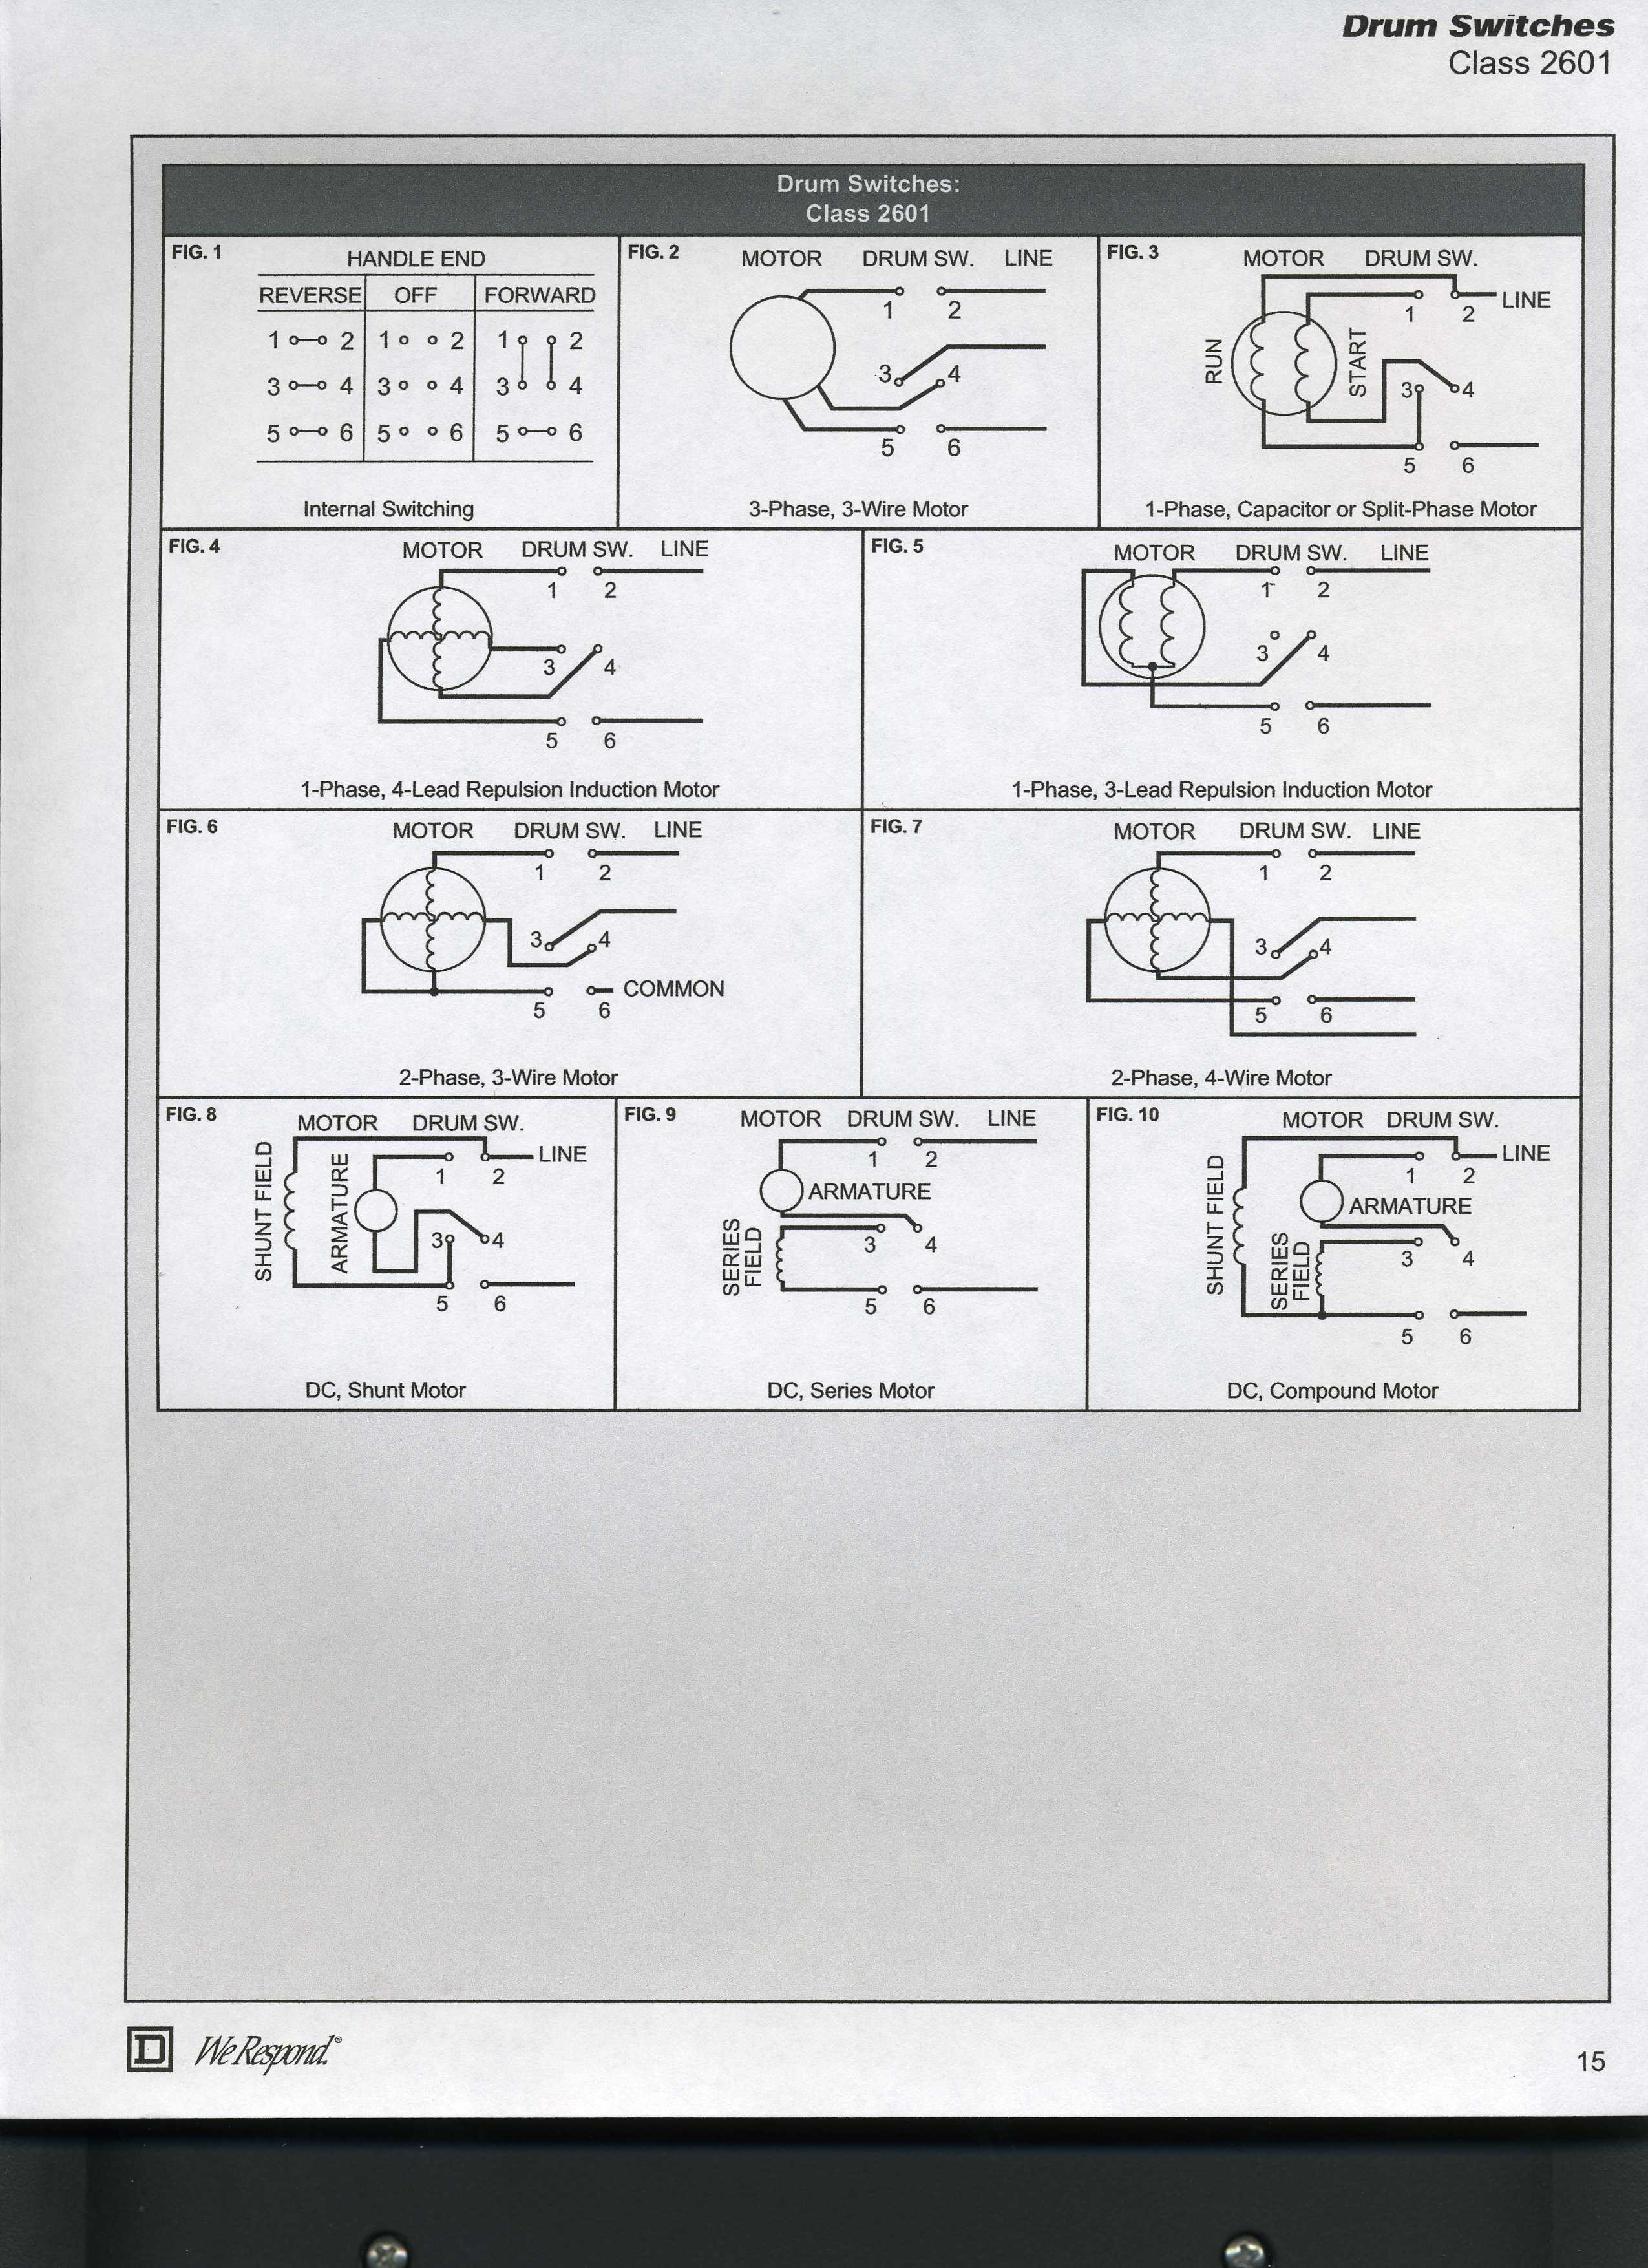 3 Phase Motor Wiring Diagram 9 Leads Unique the Wiring Diagram for Reversing A 110 V